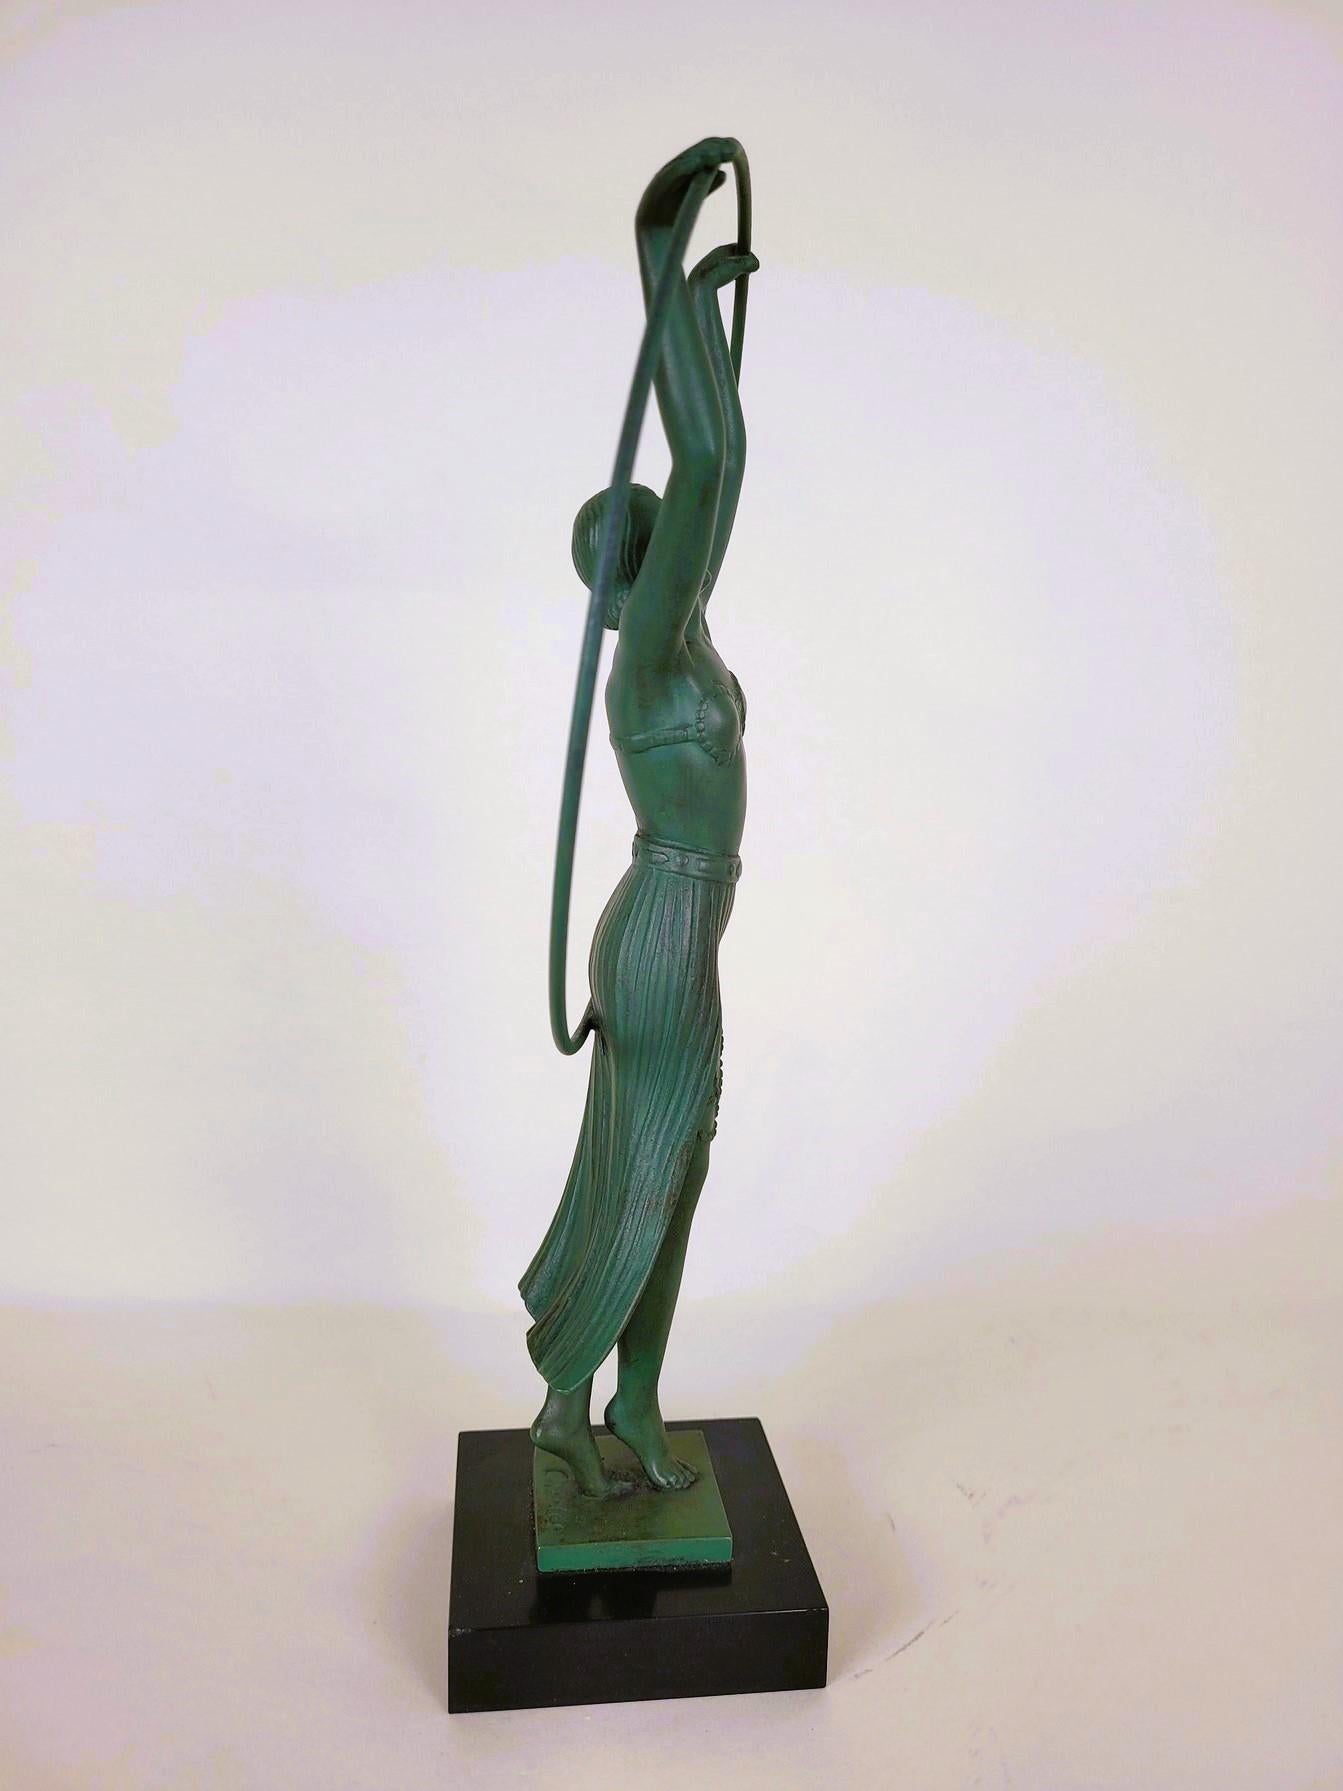 La Bayadère: Sculpture representing a dancer with a hoop, dressed in an exotic costume, and inspired by the ballet character created by Marius Petitpa

Green patina spelter on a marble base, the counter-base is signed by the artist Charles, and was